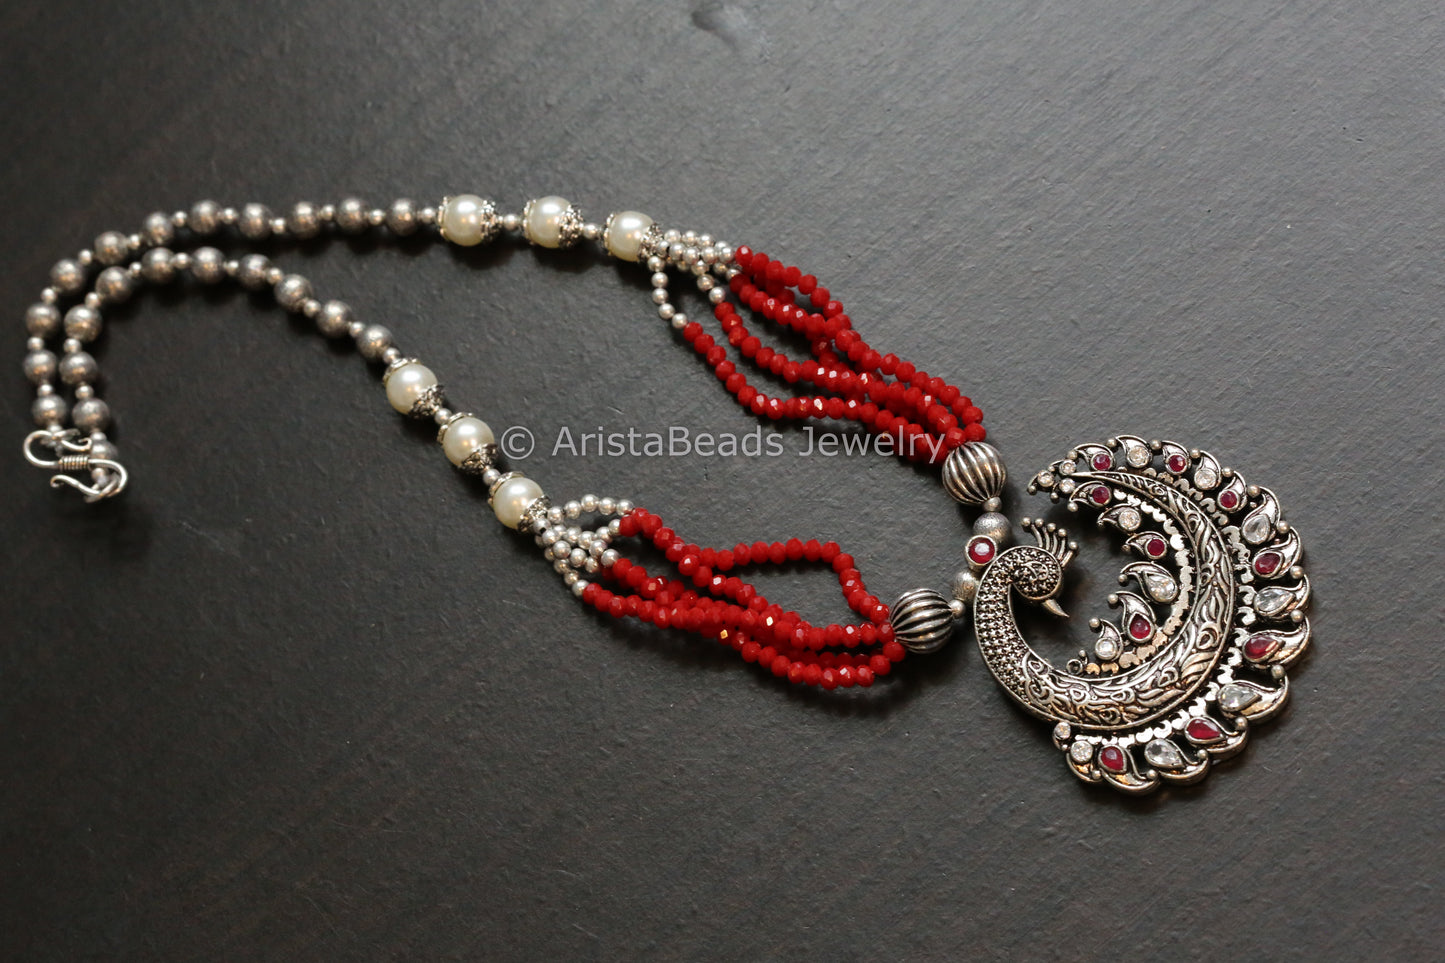 Peacock Oxidized Necklace - Red Beads